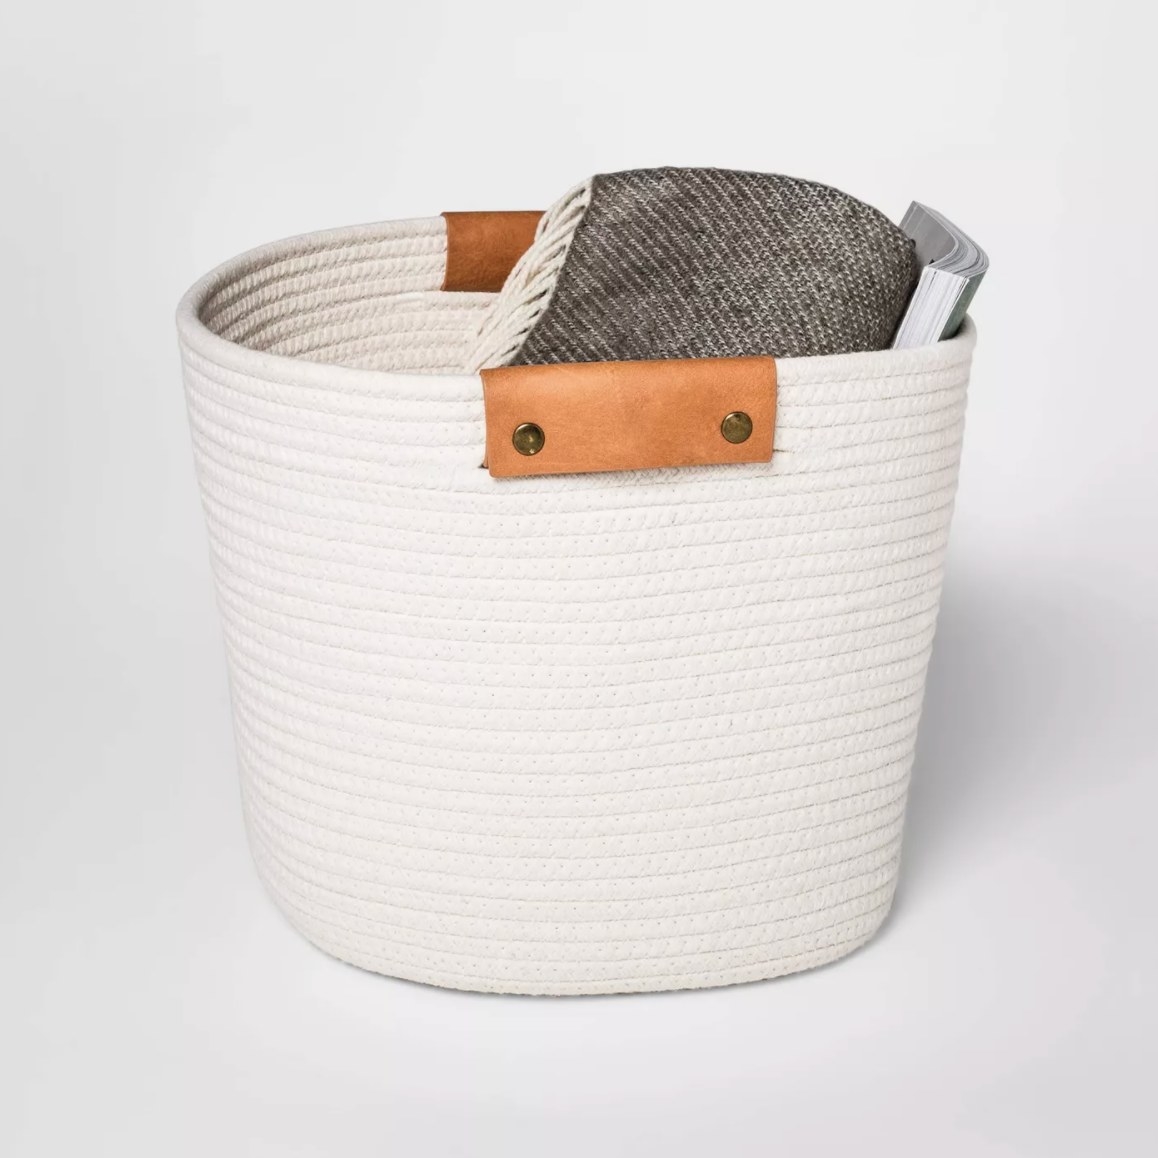 The cream rope basket which has leather handles holding a blanket and magazine